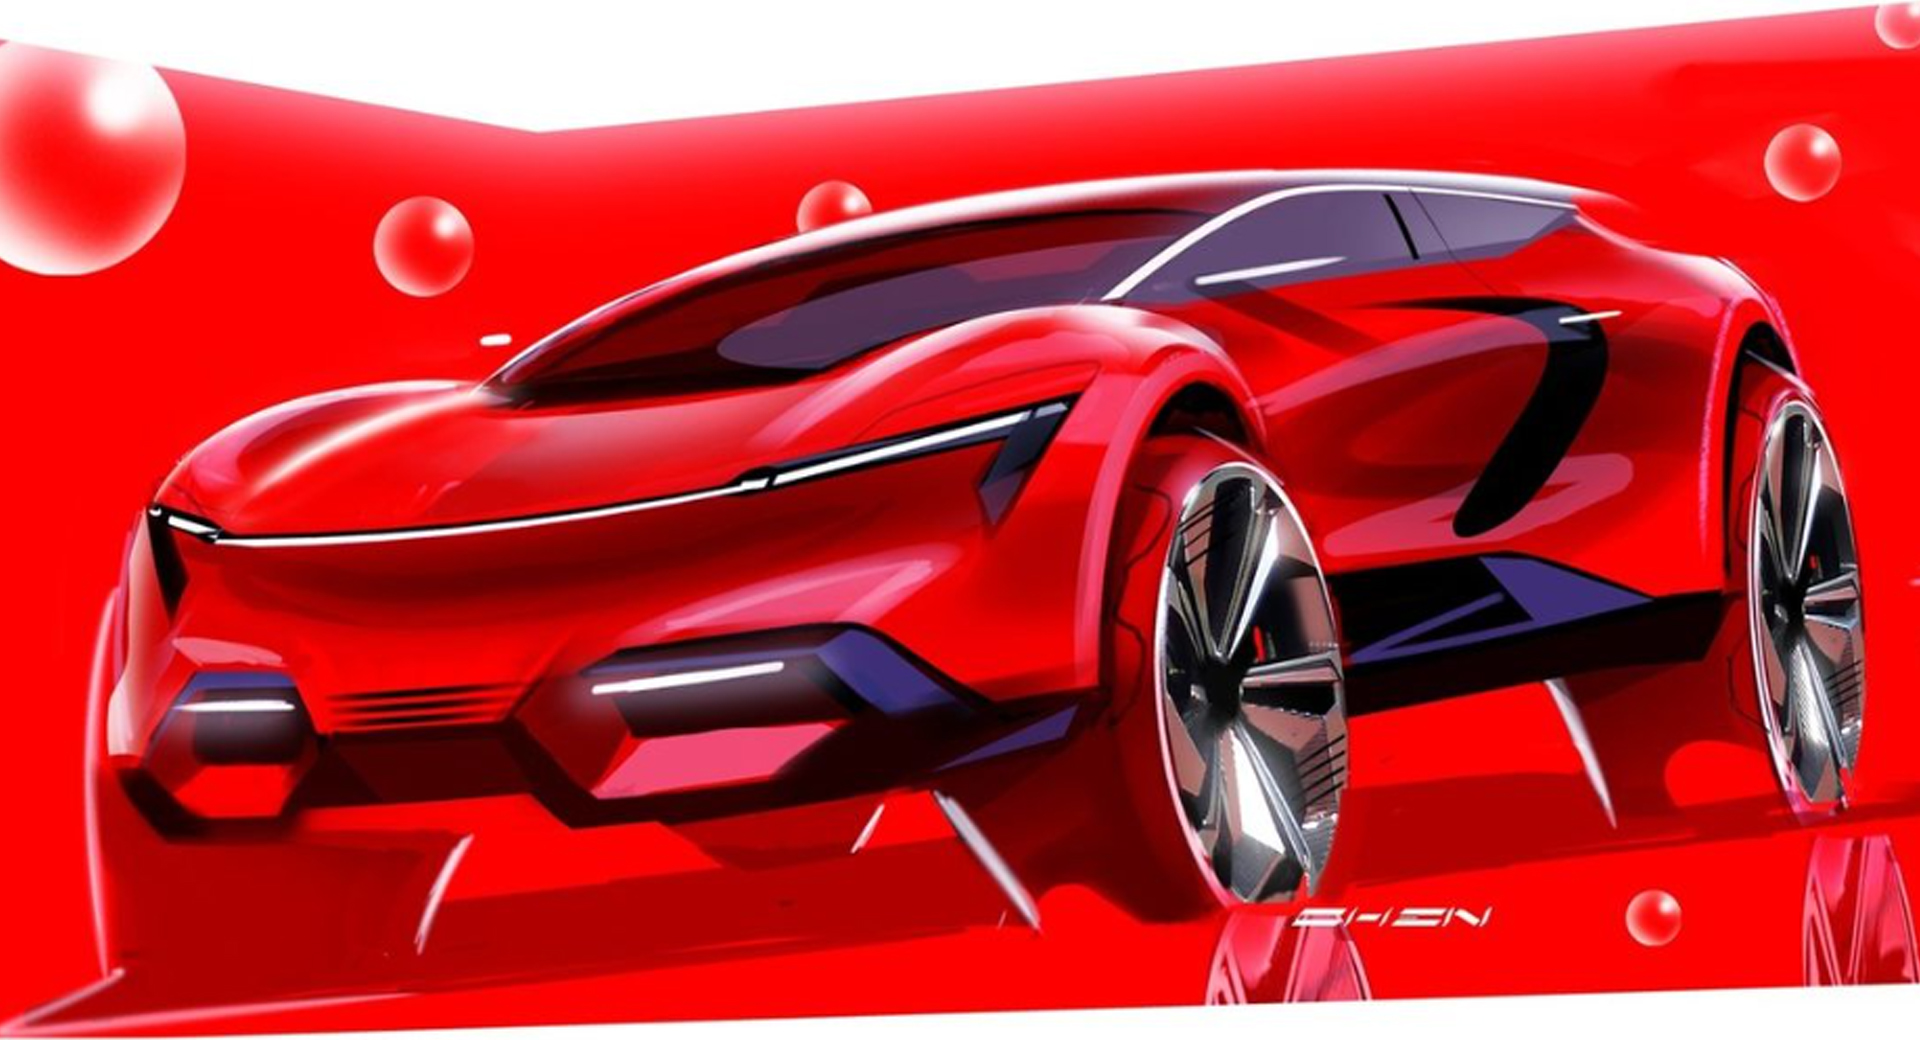 Car Design Sketching Render a Car in Photoshop  CGArchives